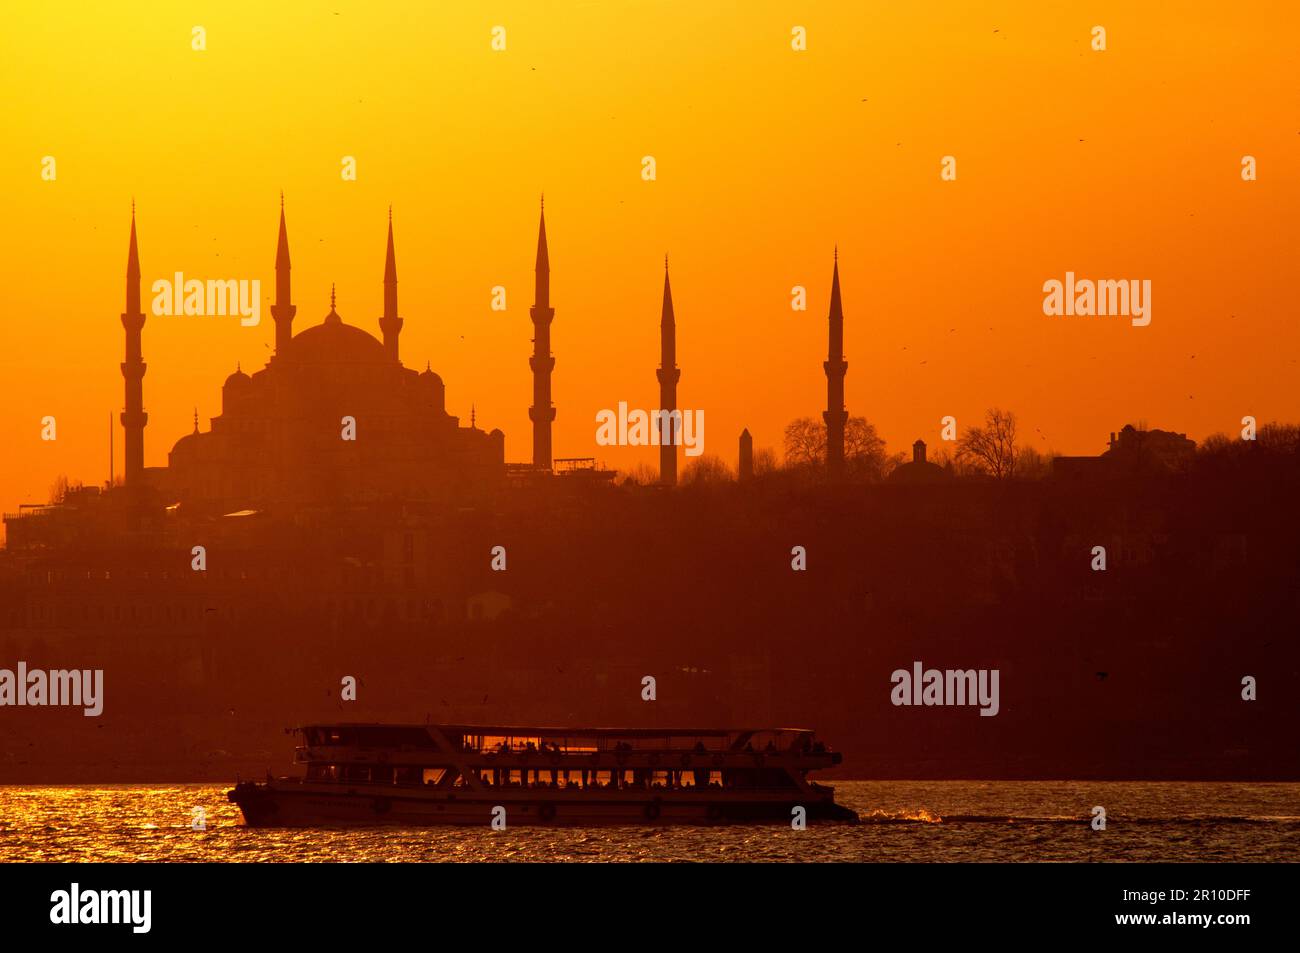 The view of the Blue Mosque and the boat at sunset is a sight worth seeing. Stock Photo